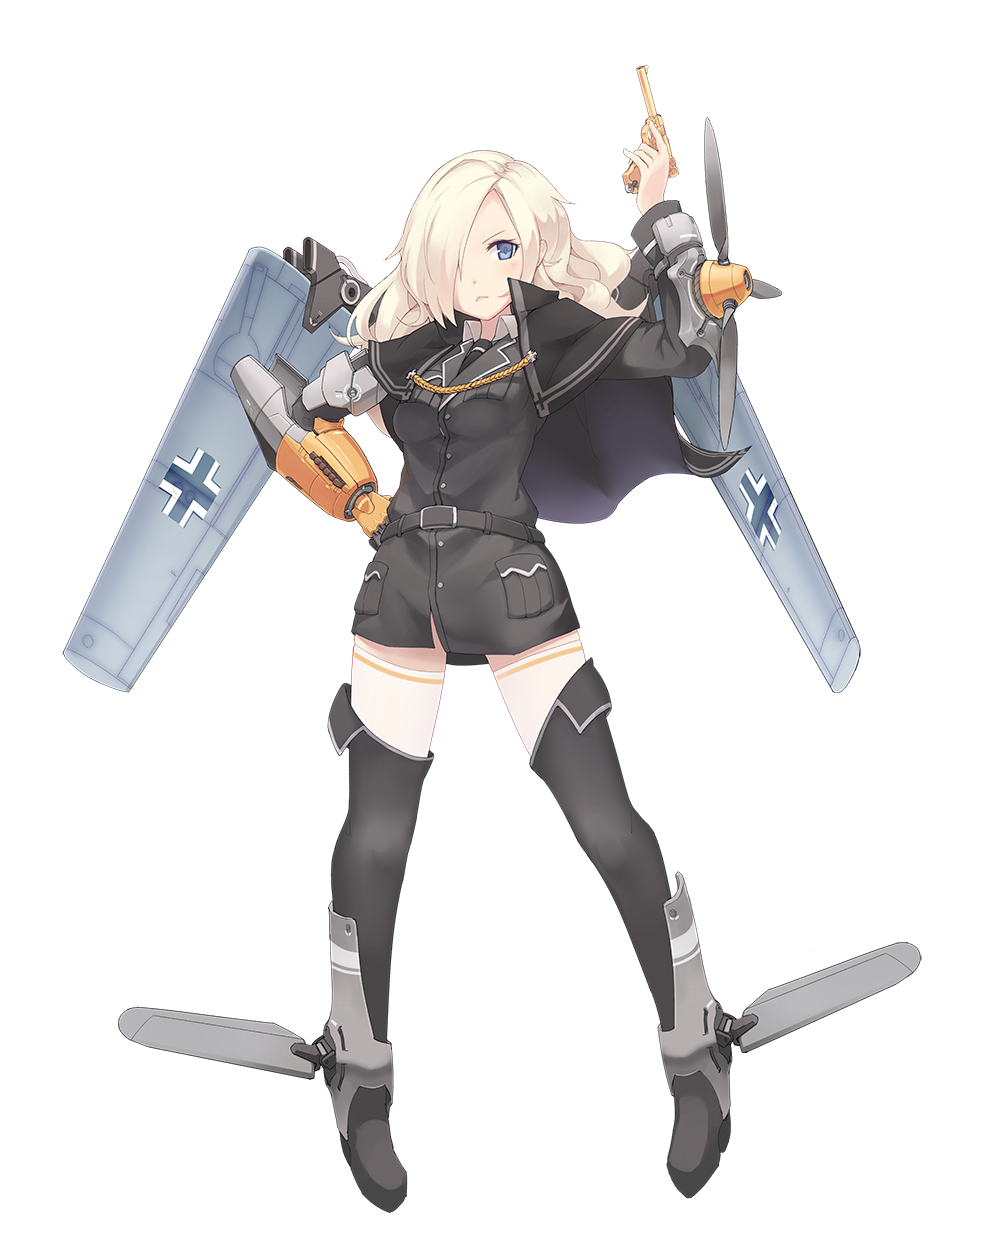 Bf-109侧边栏.png